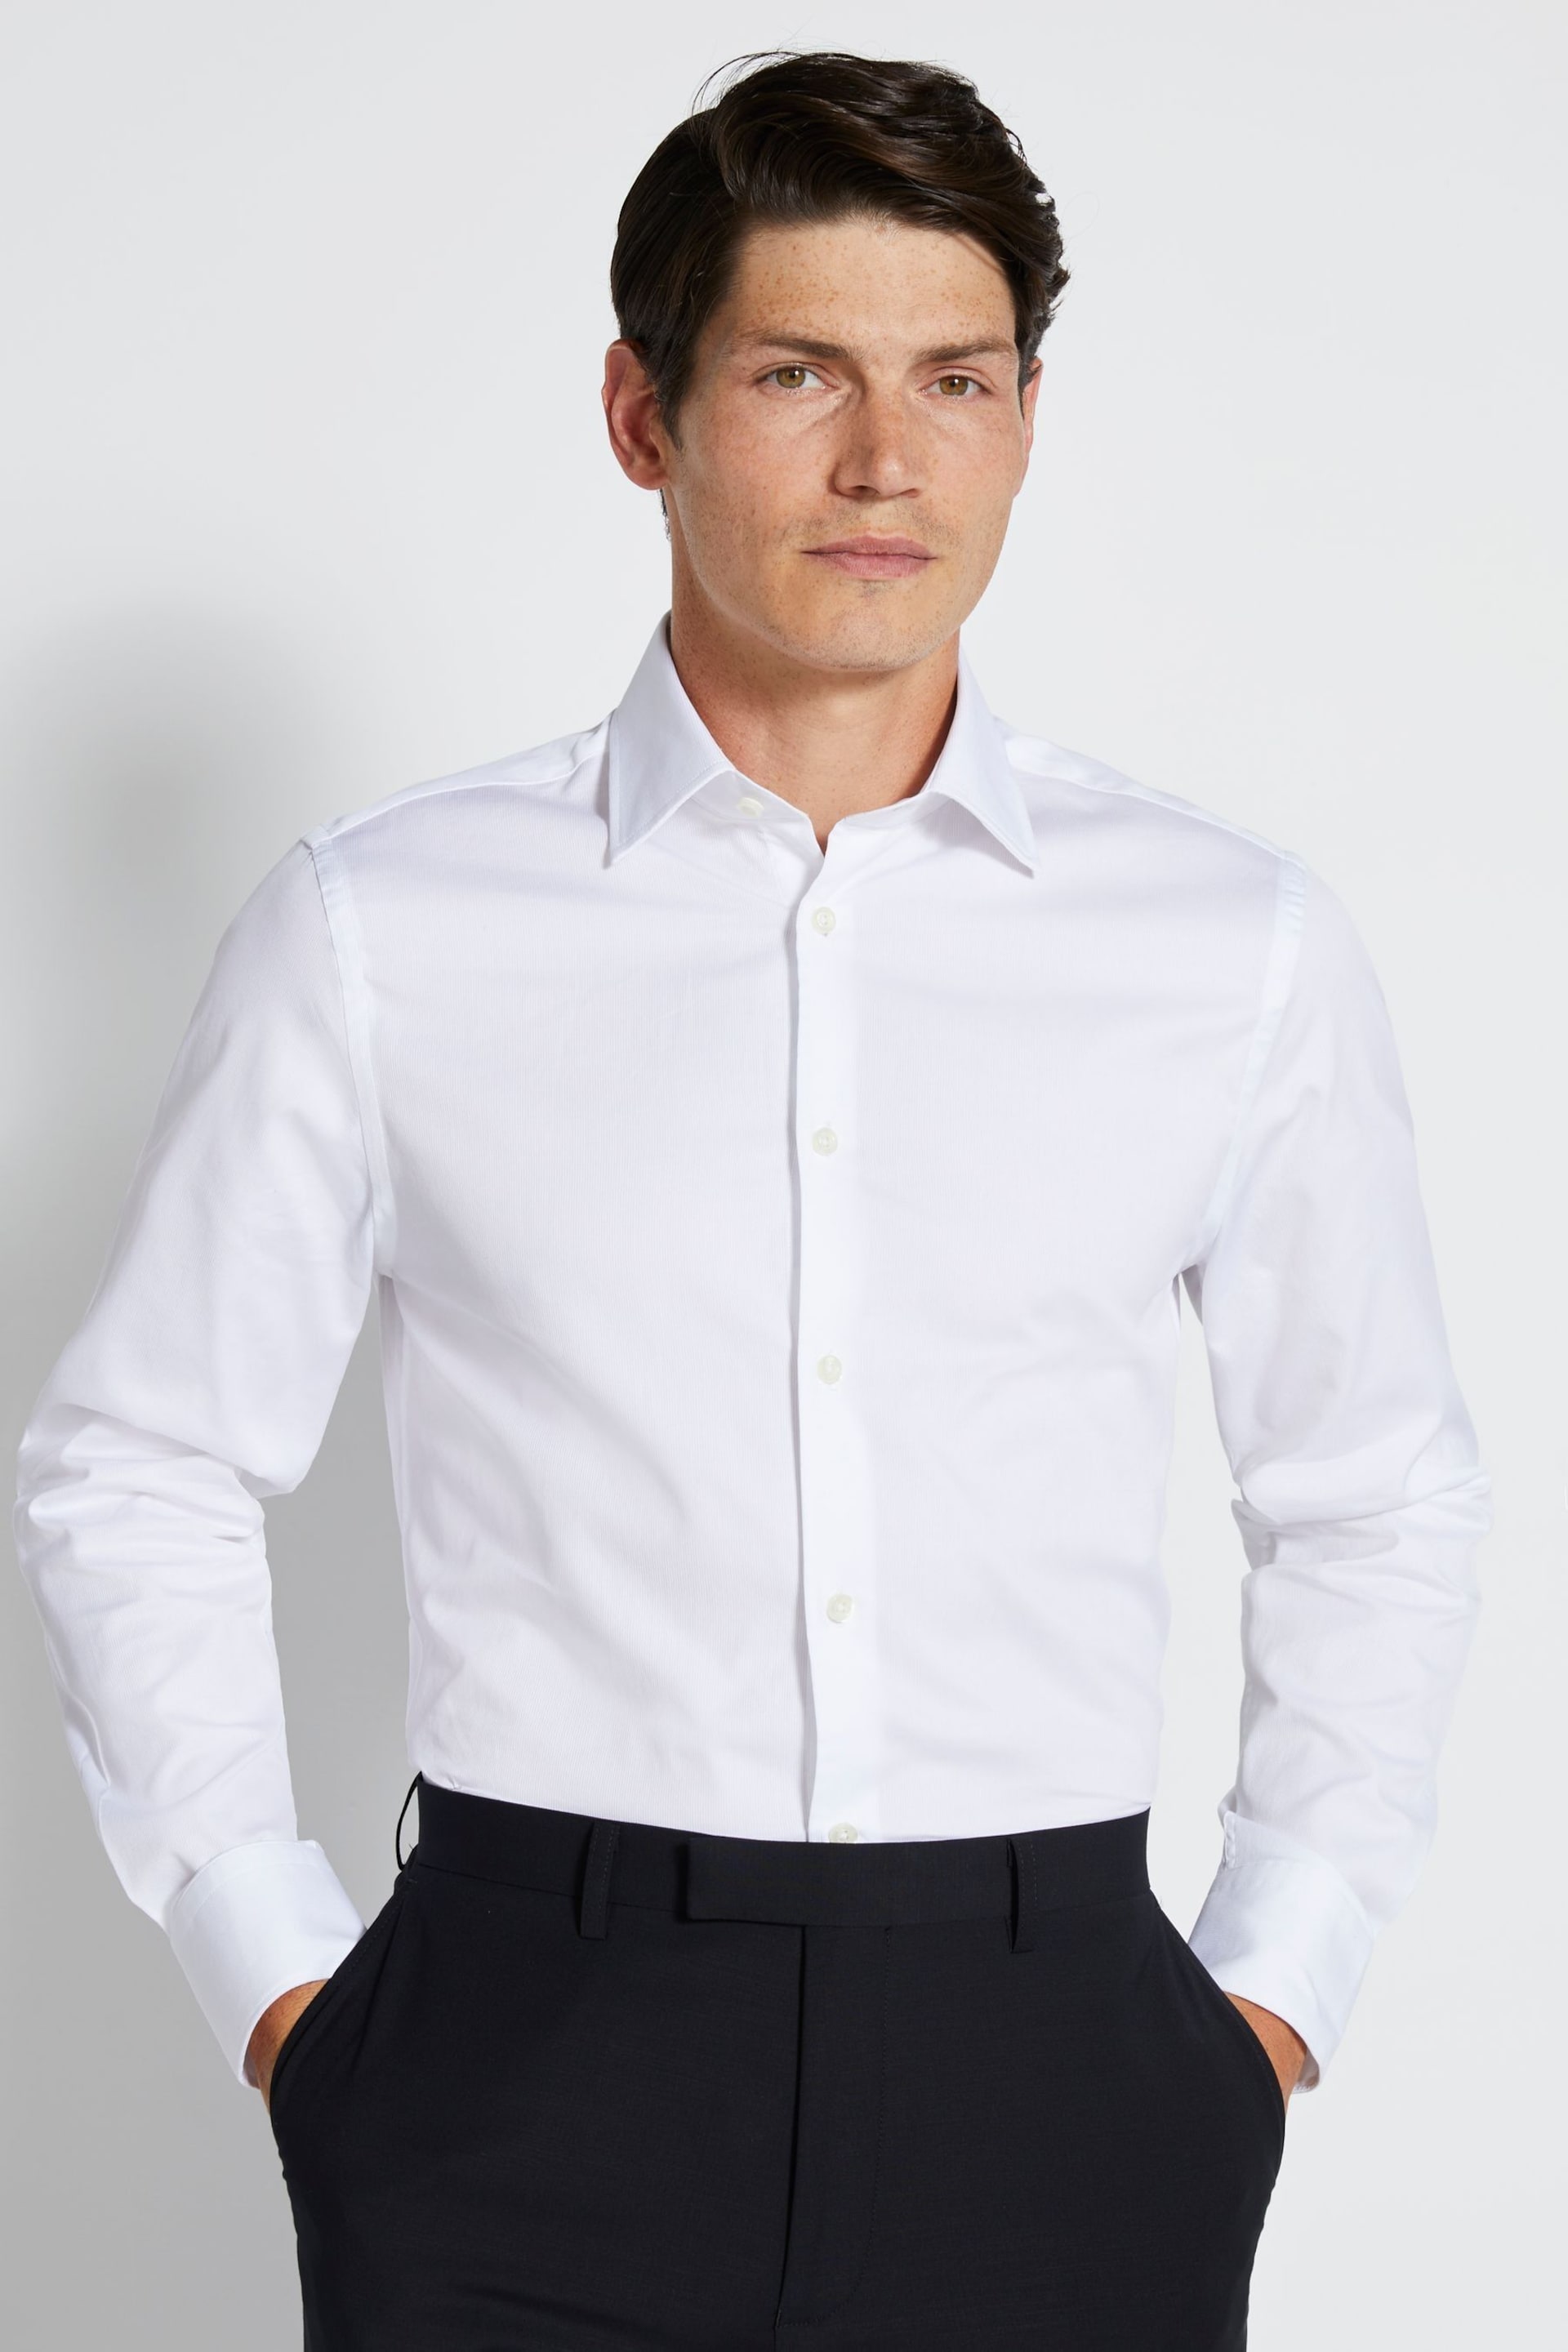 MOSS Tailored Fit Piquet Textured White Shirt - Image 1 of 3